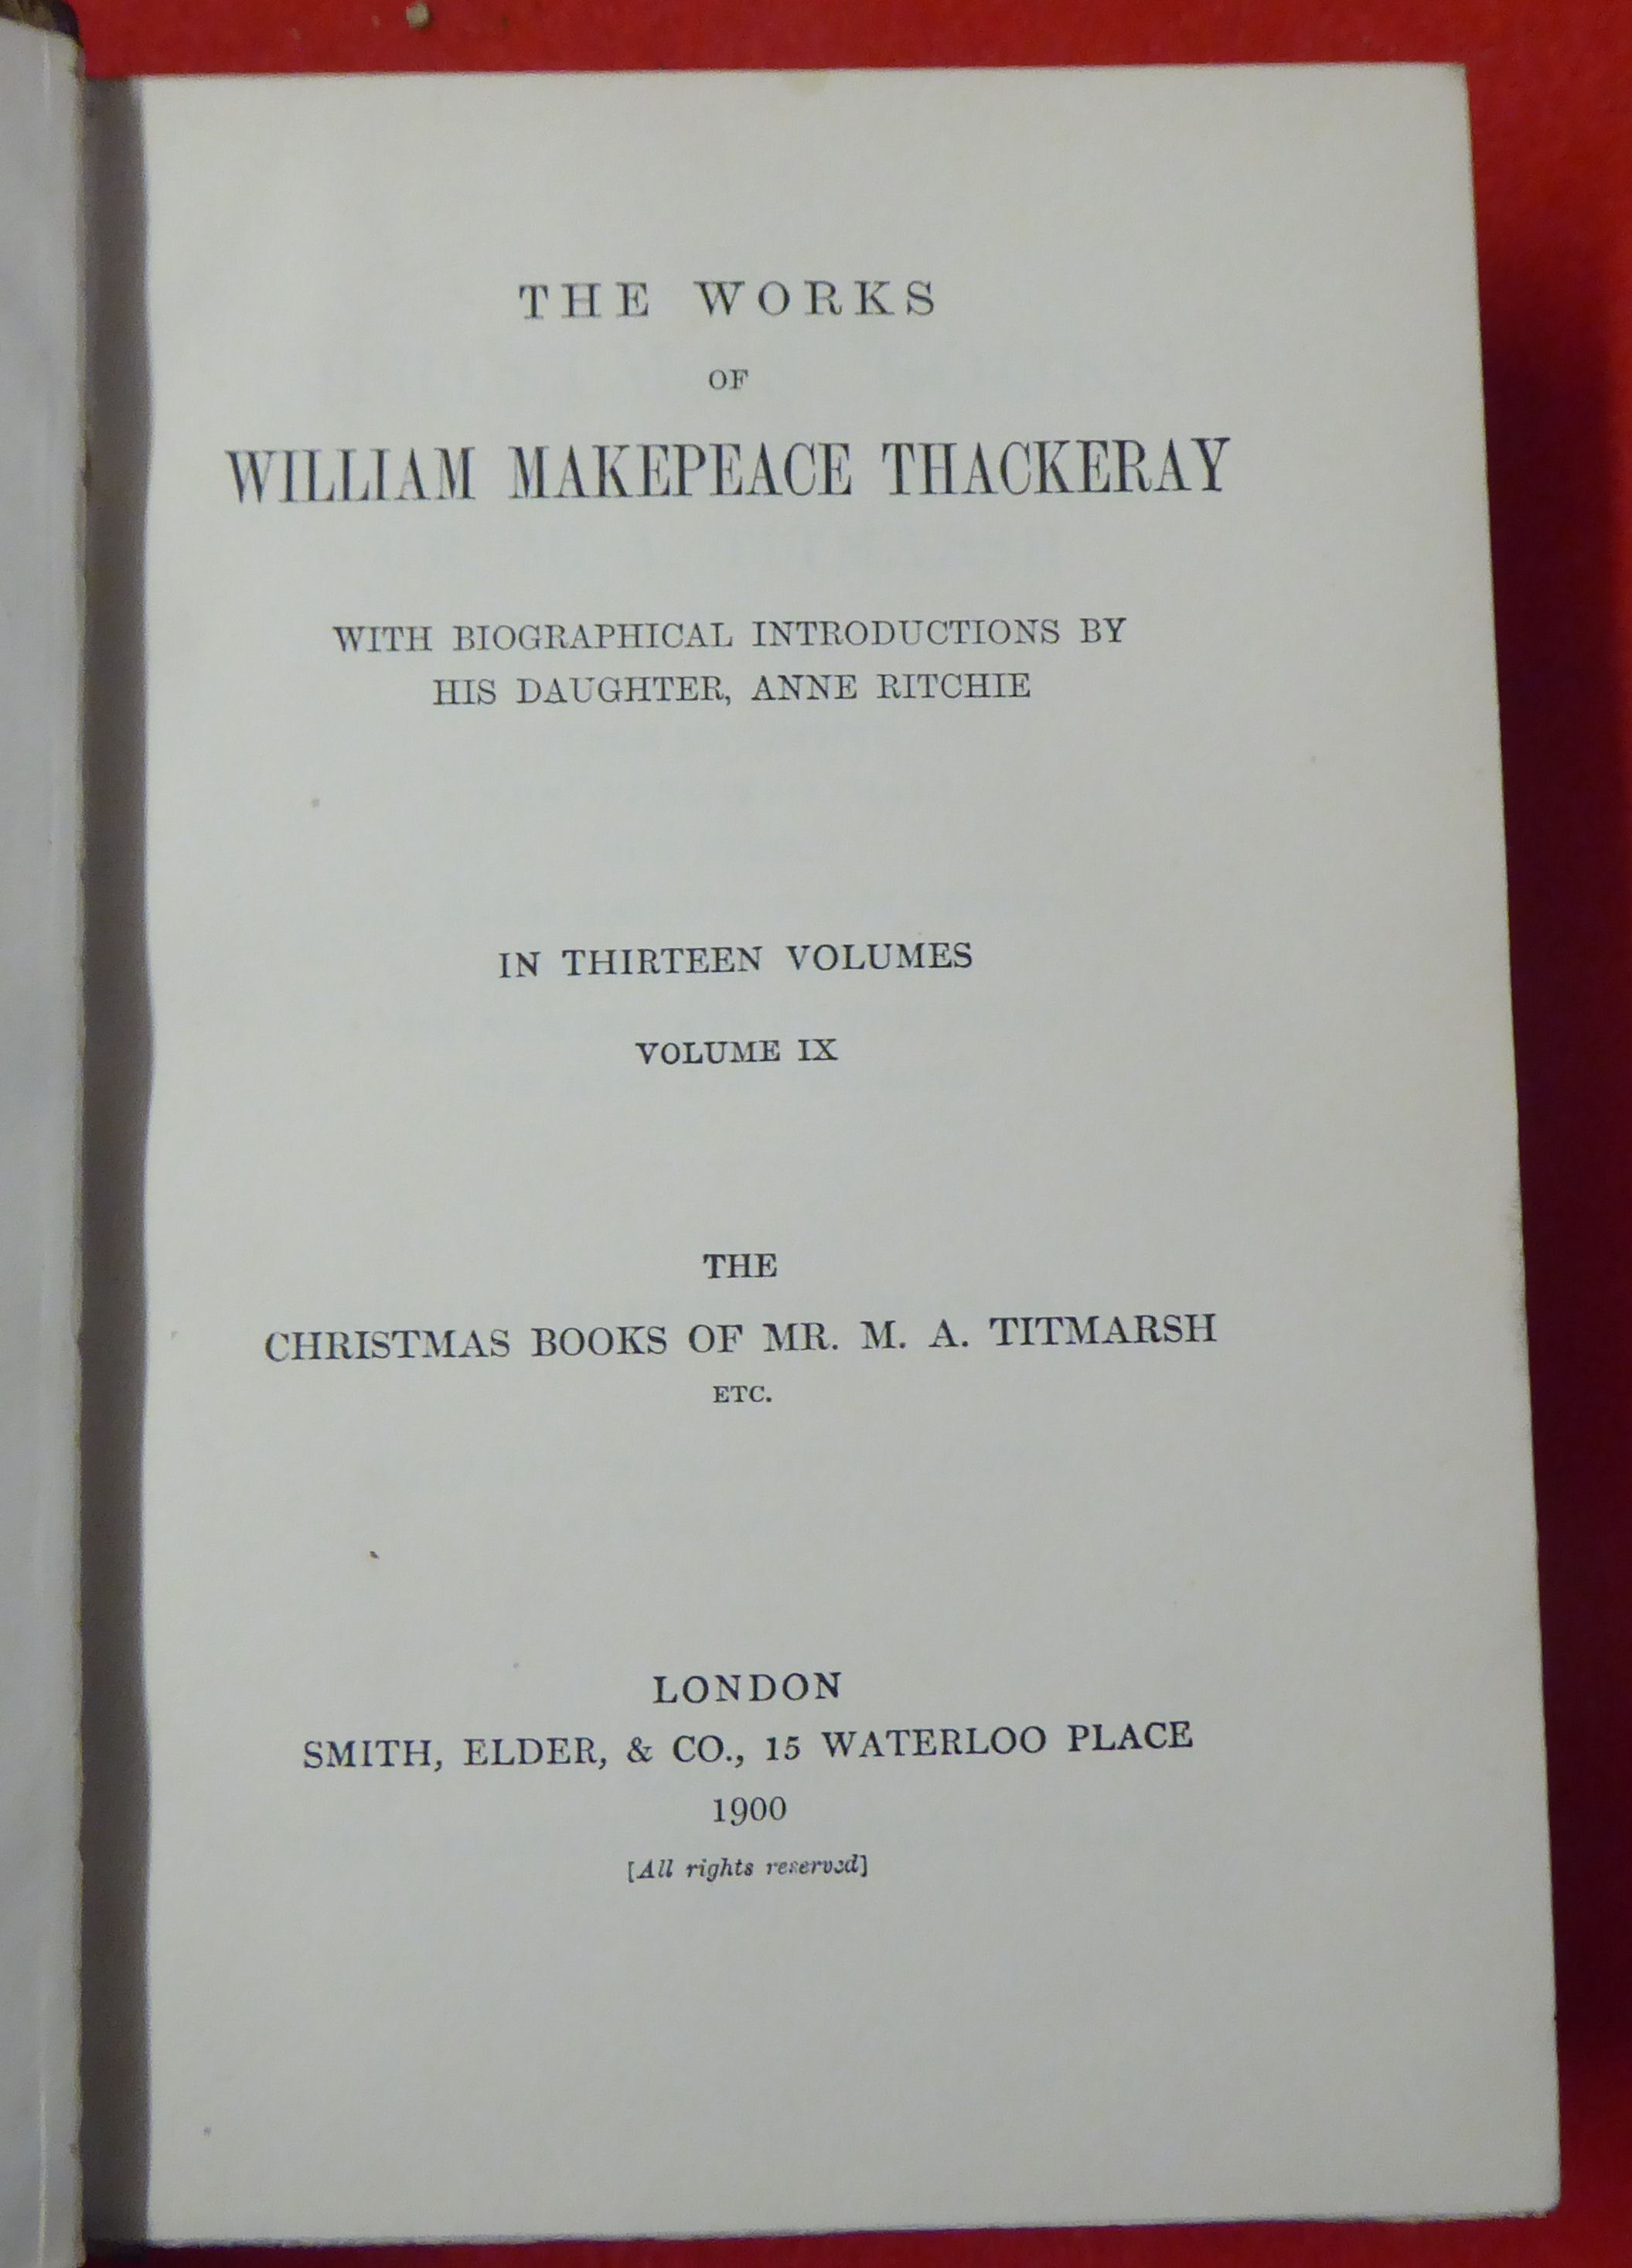 Books: 'The Works of William Makepeace Thackeray'  dated 1900, in thirteen volumes  (volume seven - Image 12 of 16